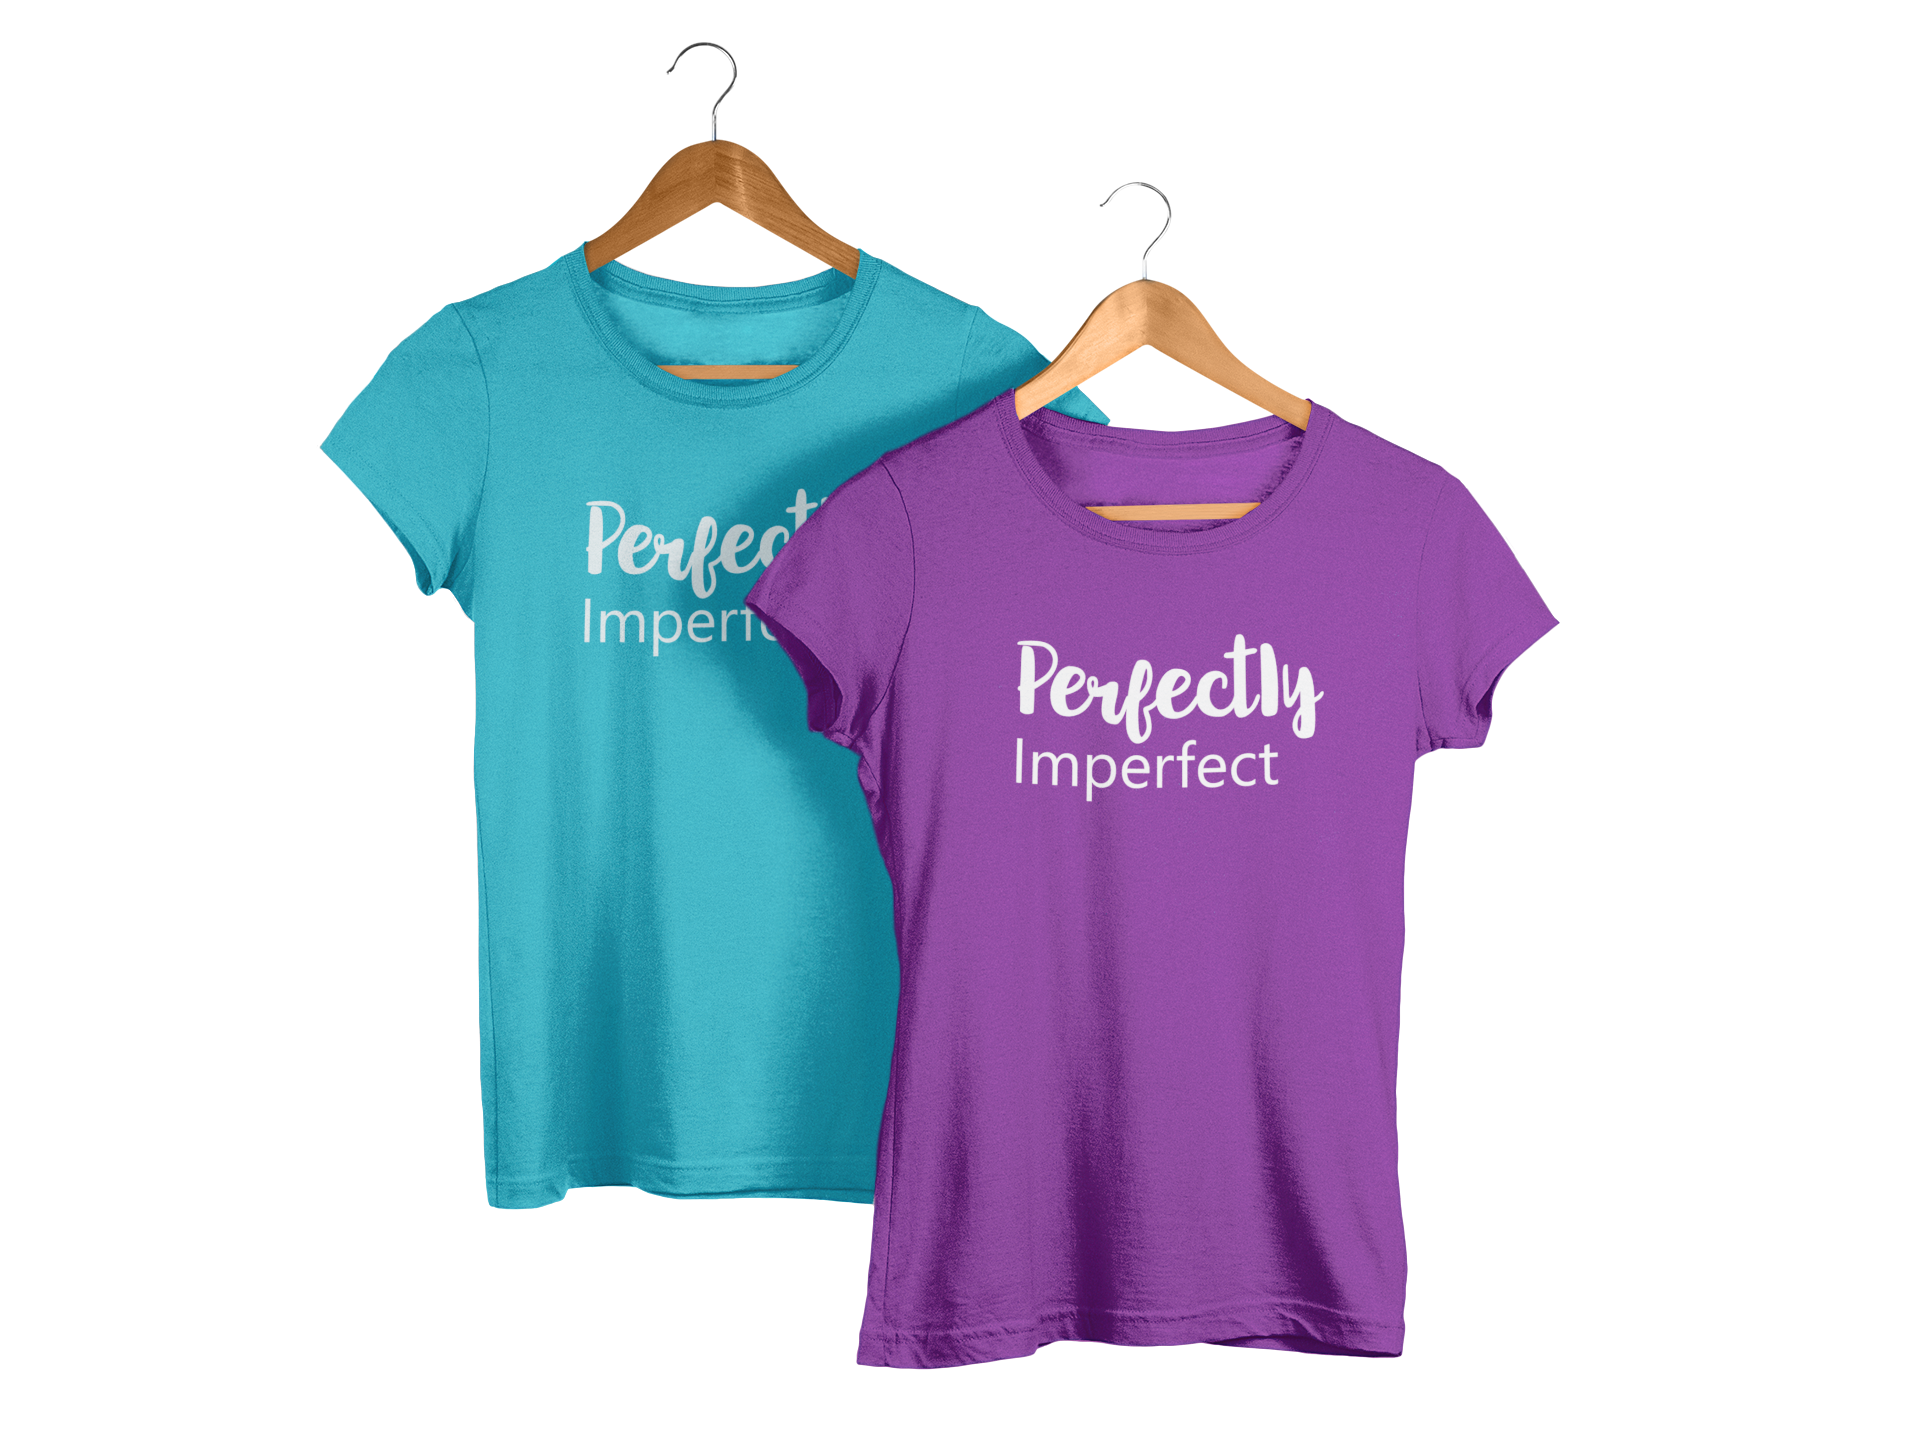 two-t-shirts-mockup-on-hangers-against-a-transparent-backdrop-a15758(7).png